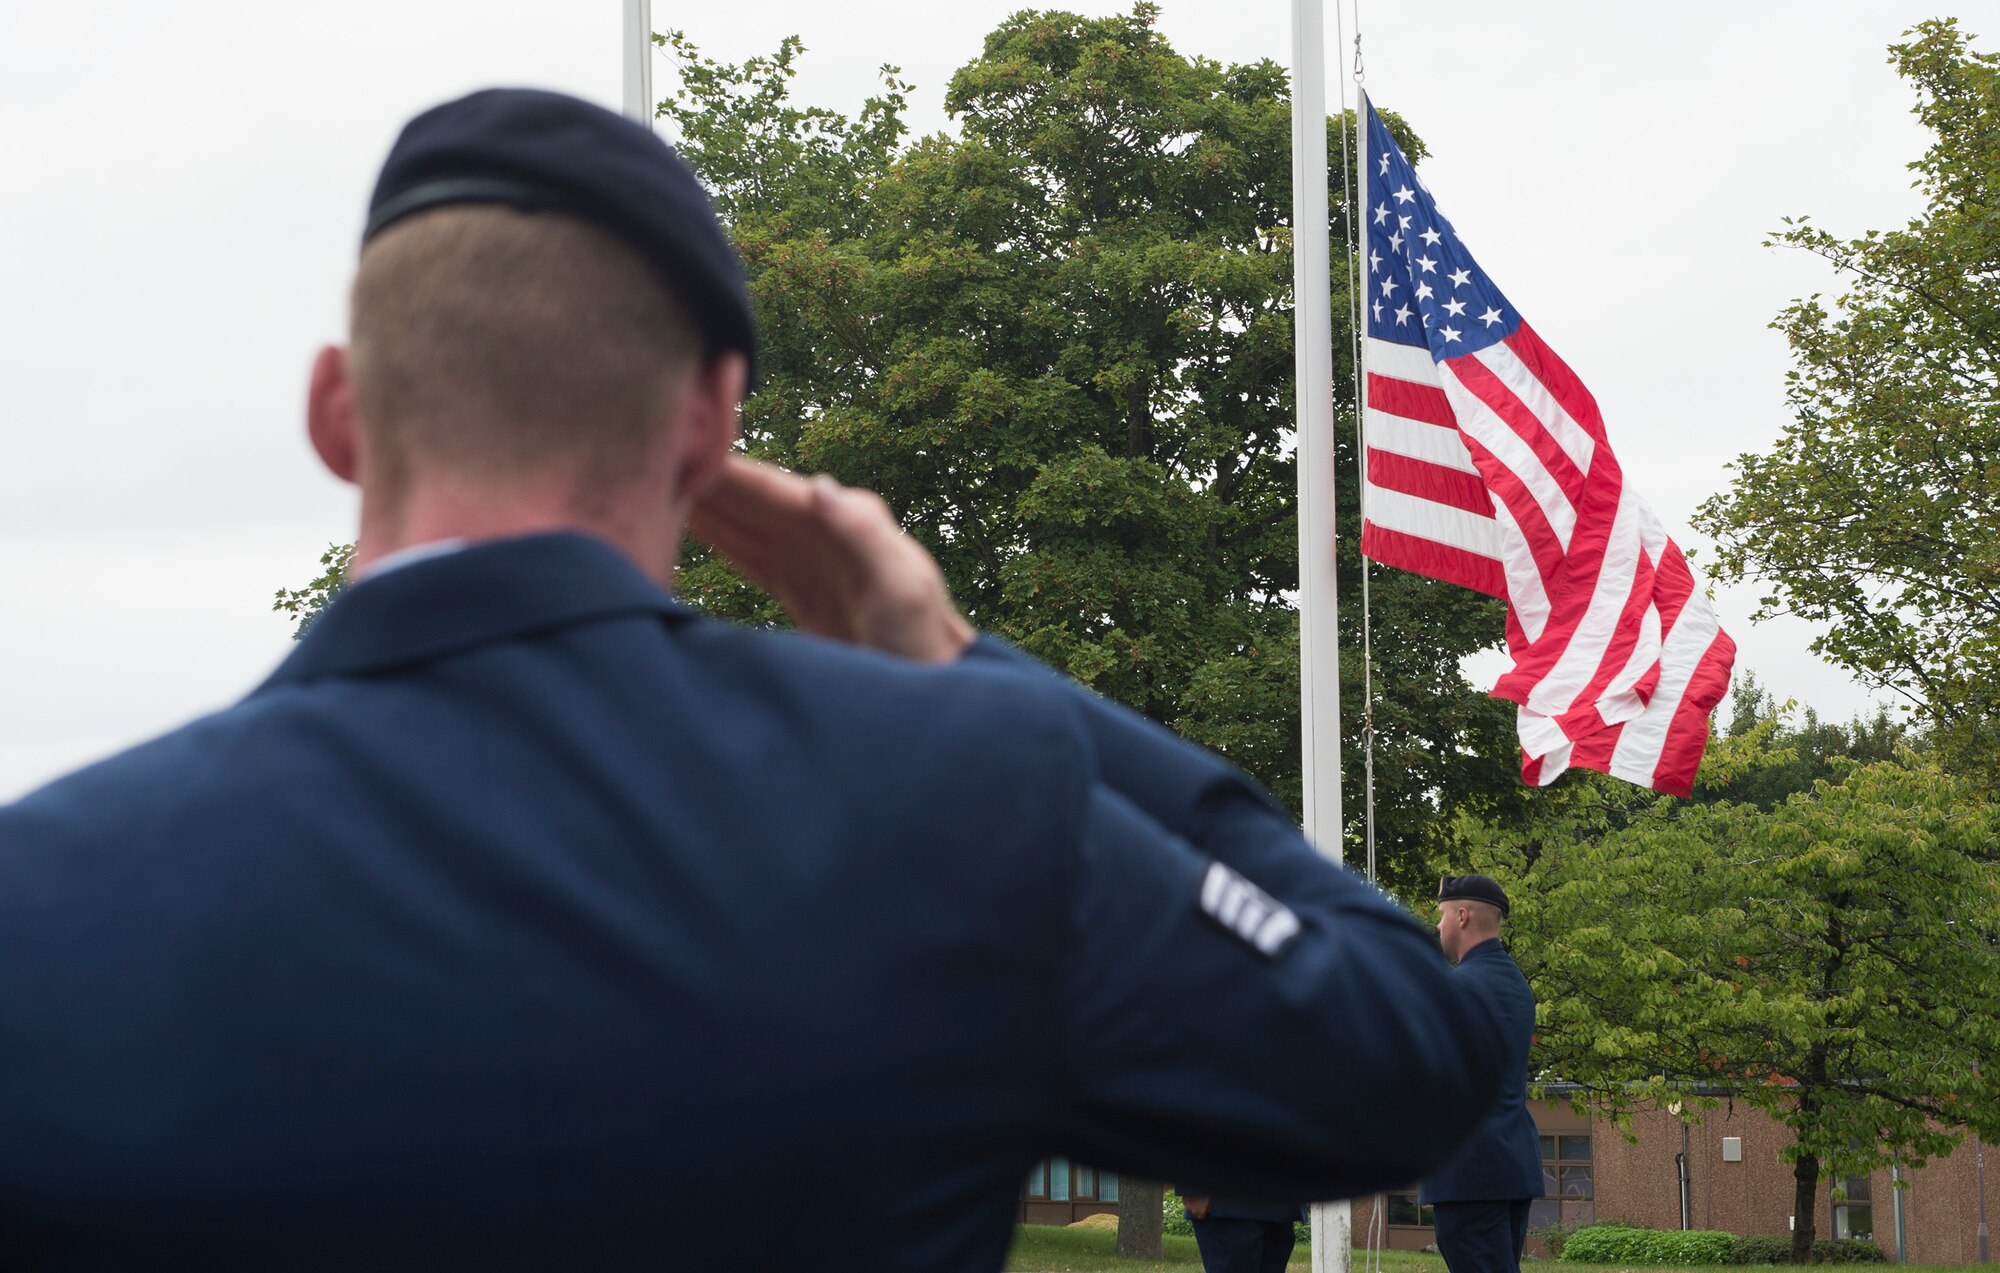 An Airman from the 423rd Security Forces Squadron salutes the United States flag in honor of Sept. 11 at RAF Croughton, United Kingdom, Sept. 11, 2018. RAF Croughton payed respects by holding a retreat ceremony and speech. (U.S. Air Force photo by Senior Airman Chase Sousa)